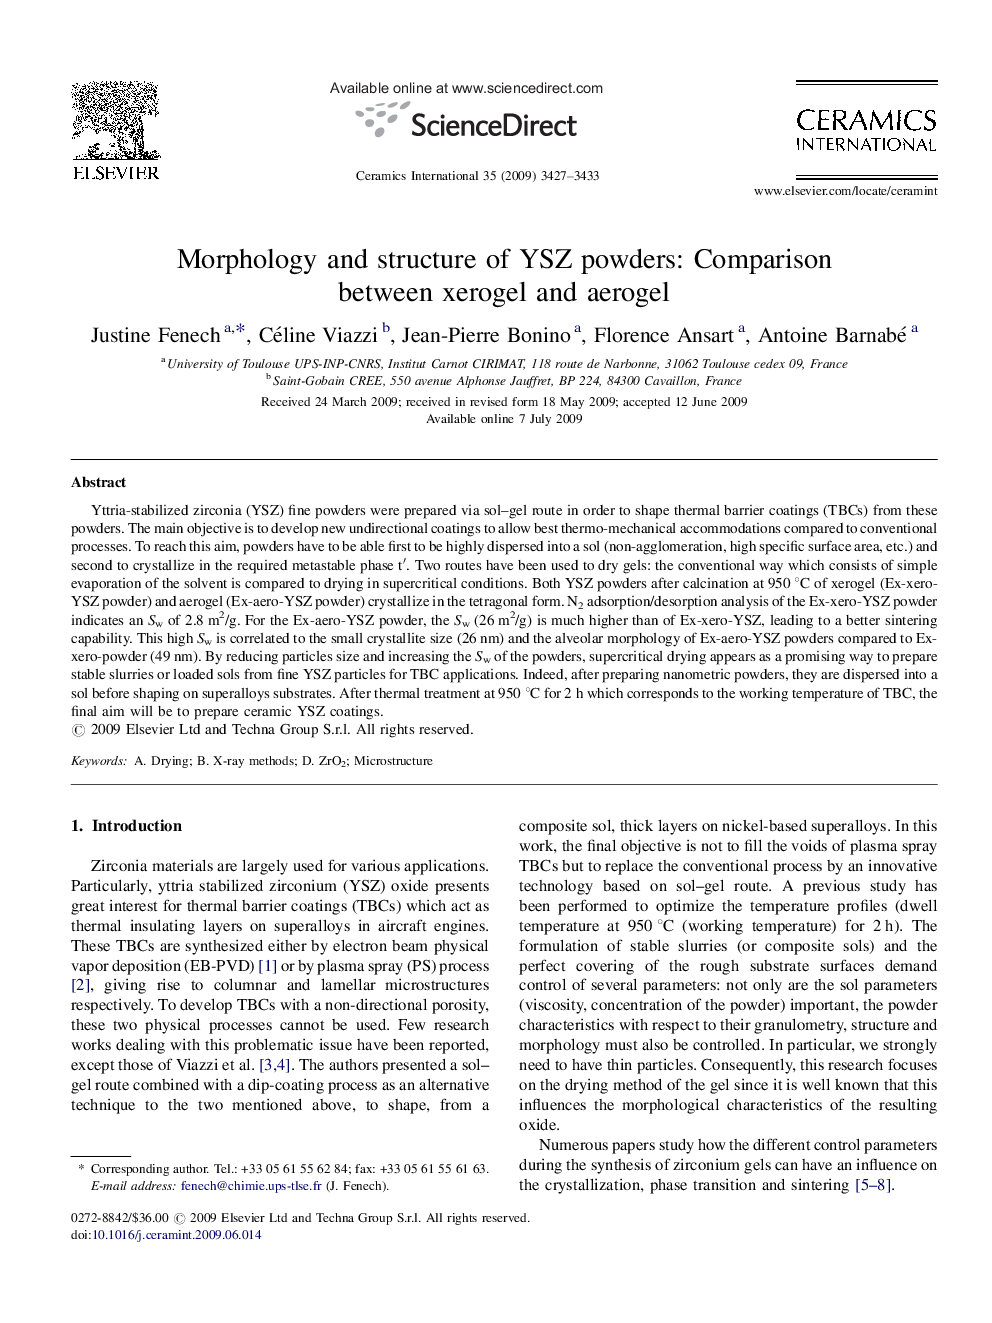 Morphology and structure of YSZ powders: Comparison between xerogel and aerogel